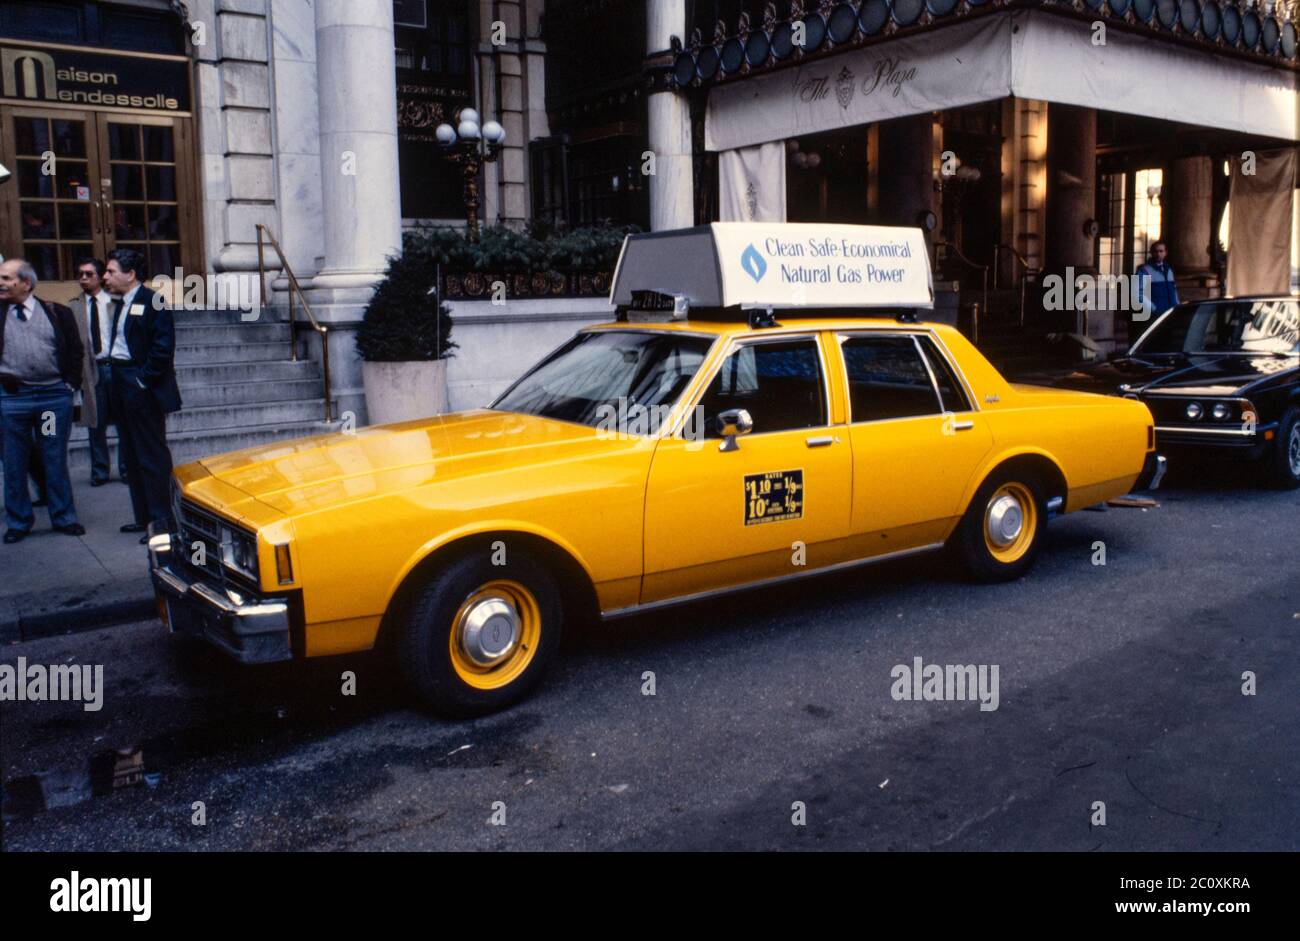 Taxi Cab in front of Plaza Hotel 1980's Stock Photo